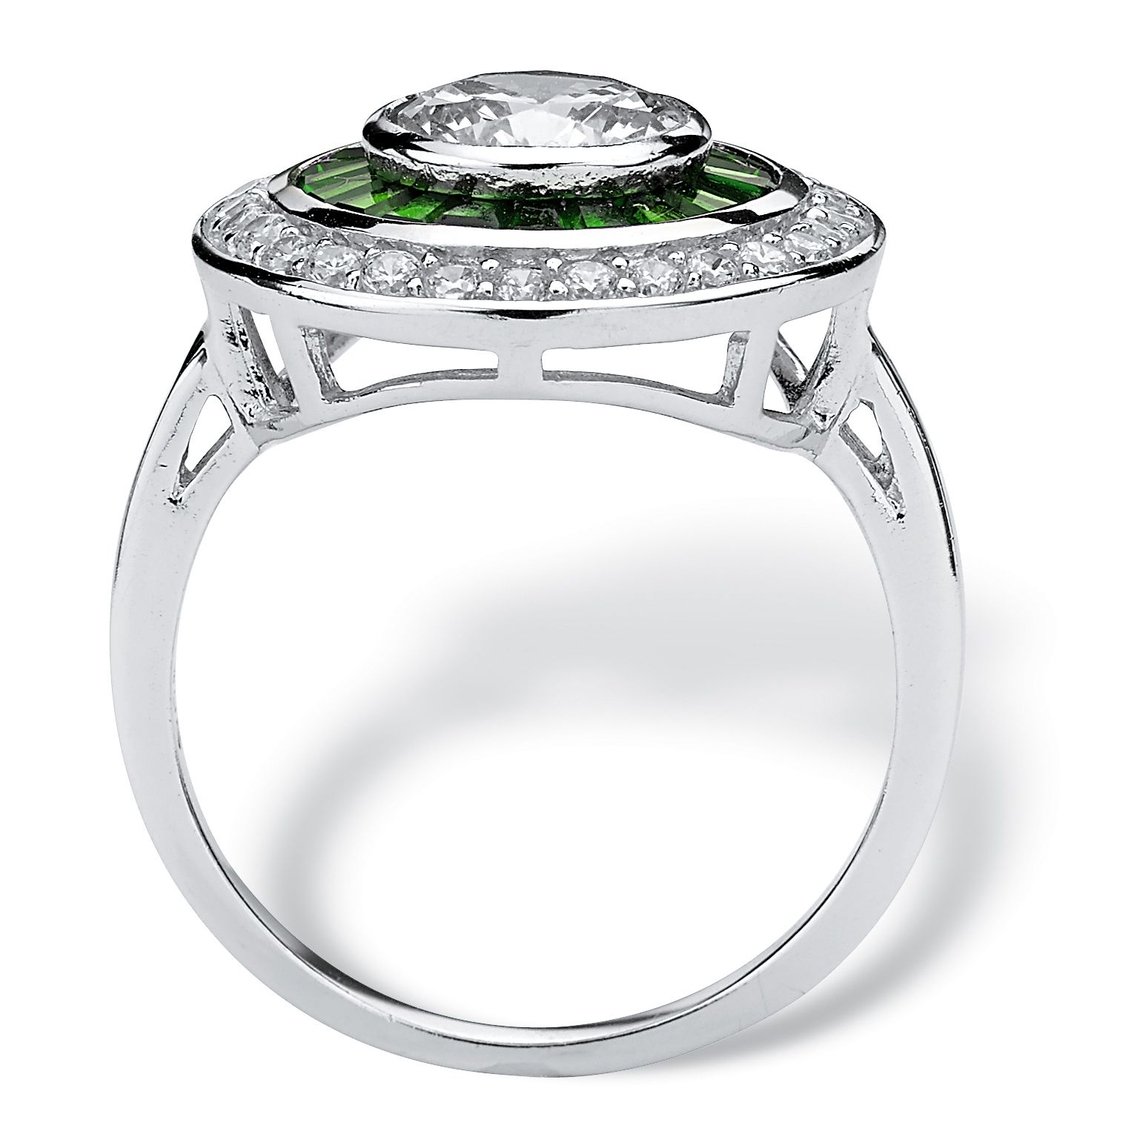 PalmBeach 2.26 TCW CZ and Emerald Halo Ring in Platinum-plated Sterling Silver - Image 2 of 5